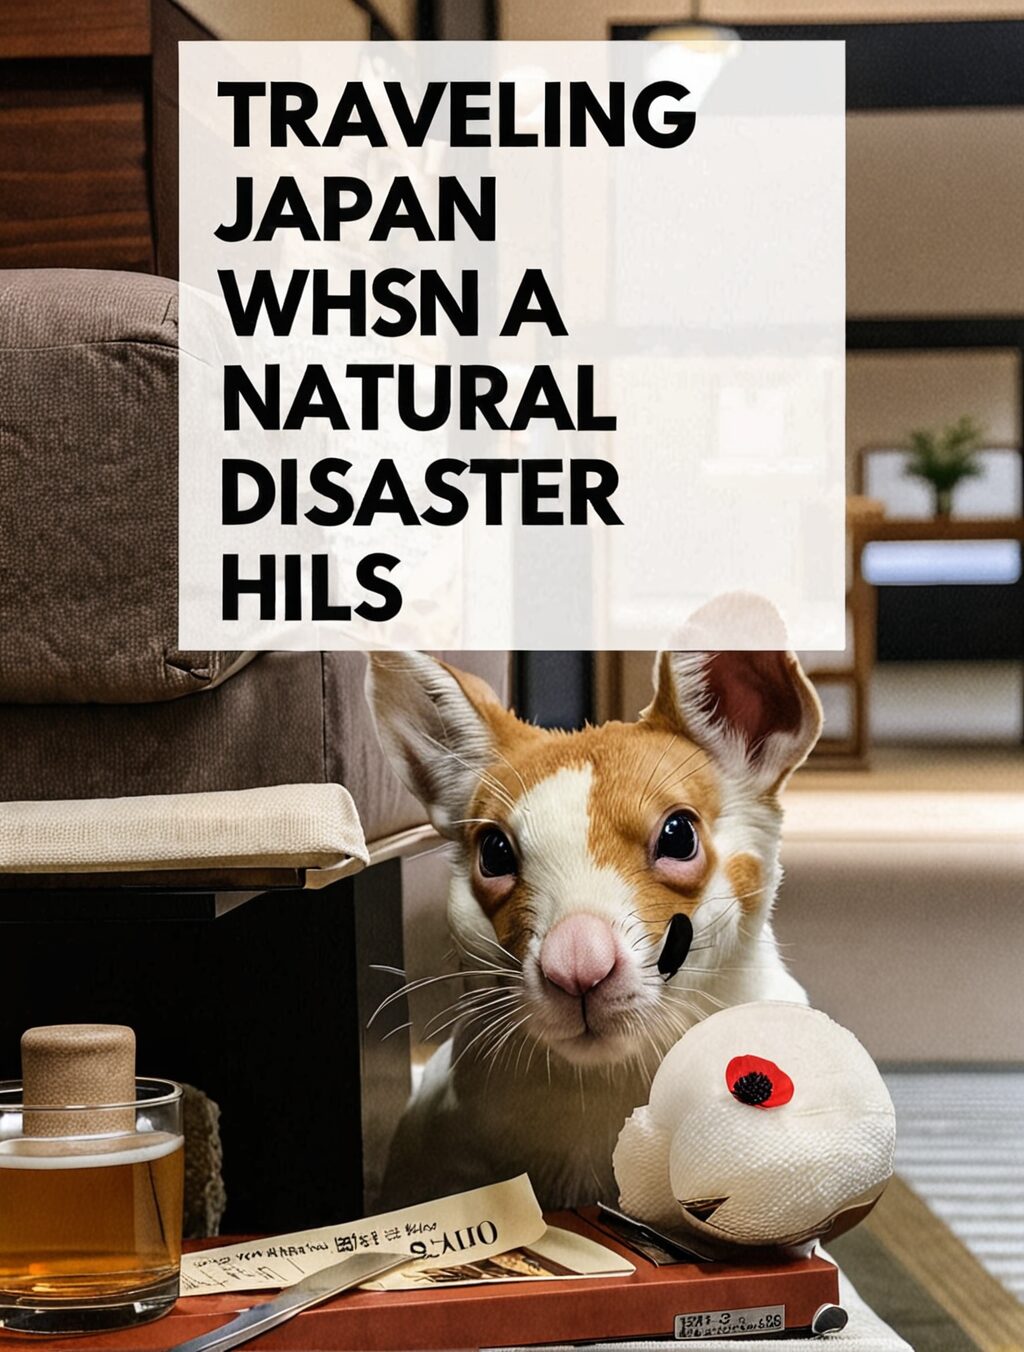 worst time to visit japan from australia